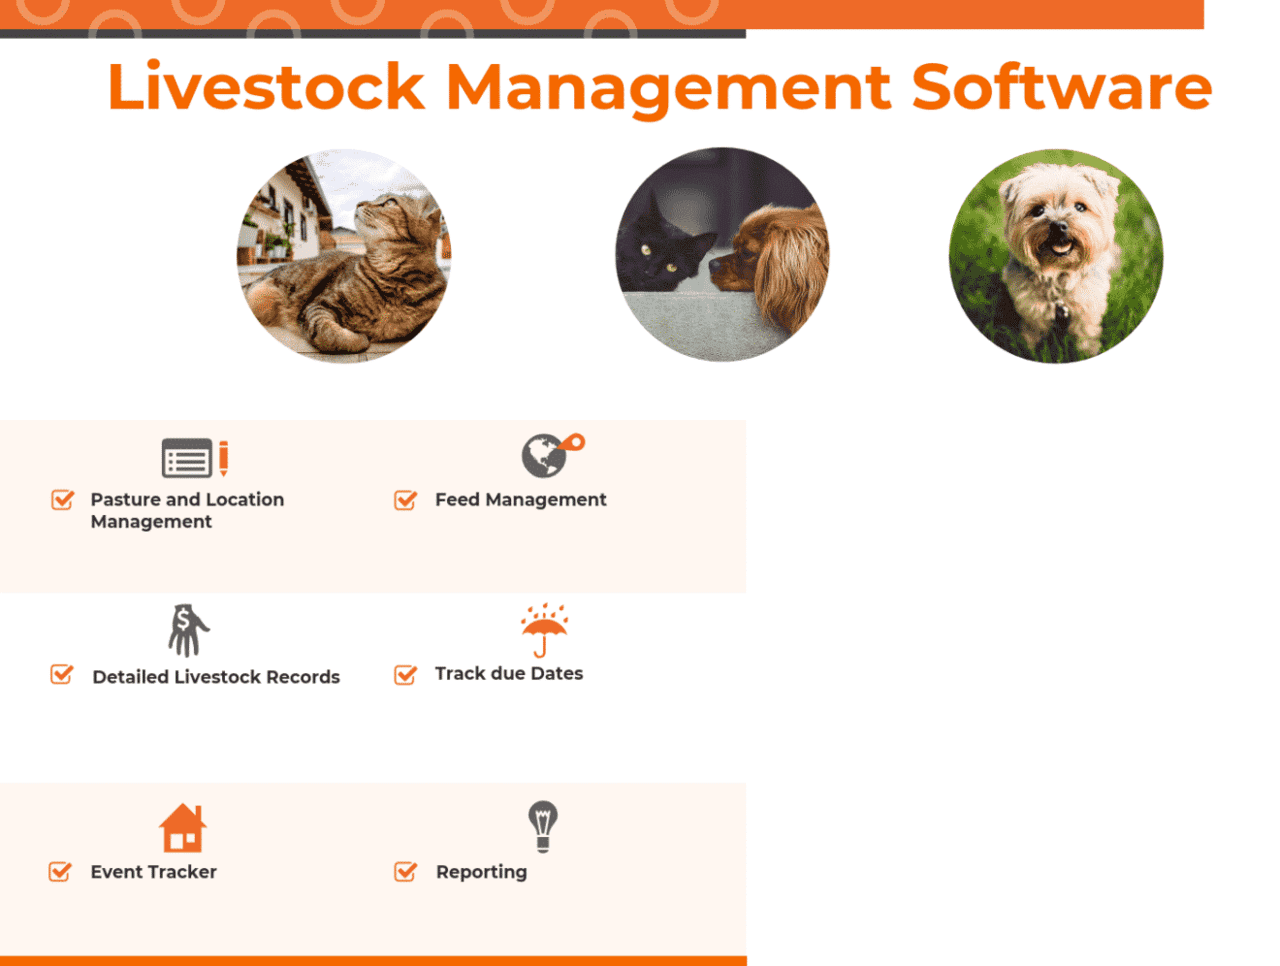 Top 8 Livestock Management Software in 2022 - Reviews, Features, Pricing,  Comparison - PAT RESEARCH: B2B Reviews, Buying Guides & Best Practices